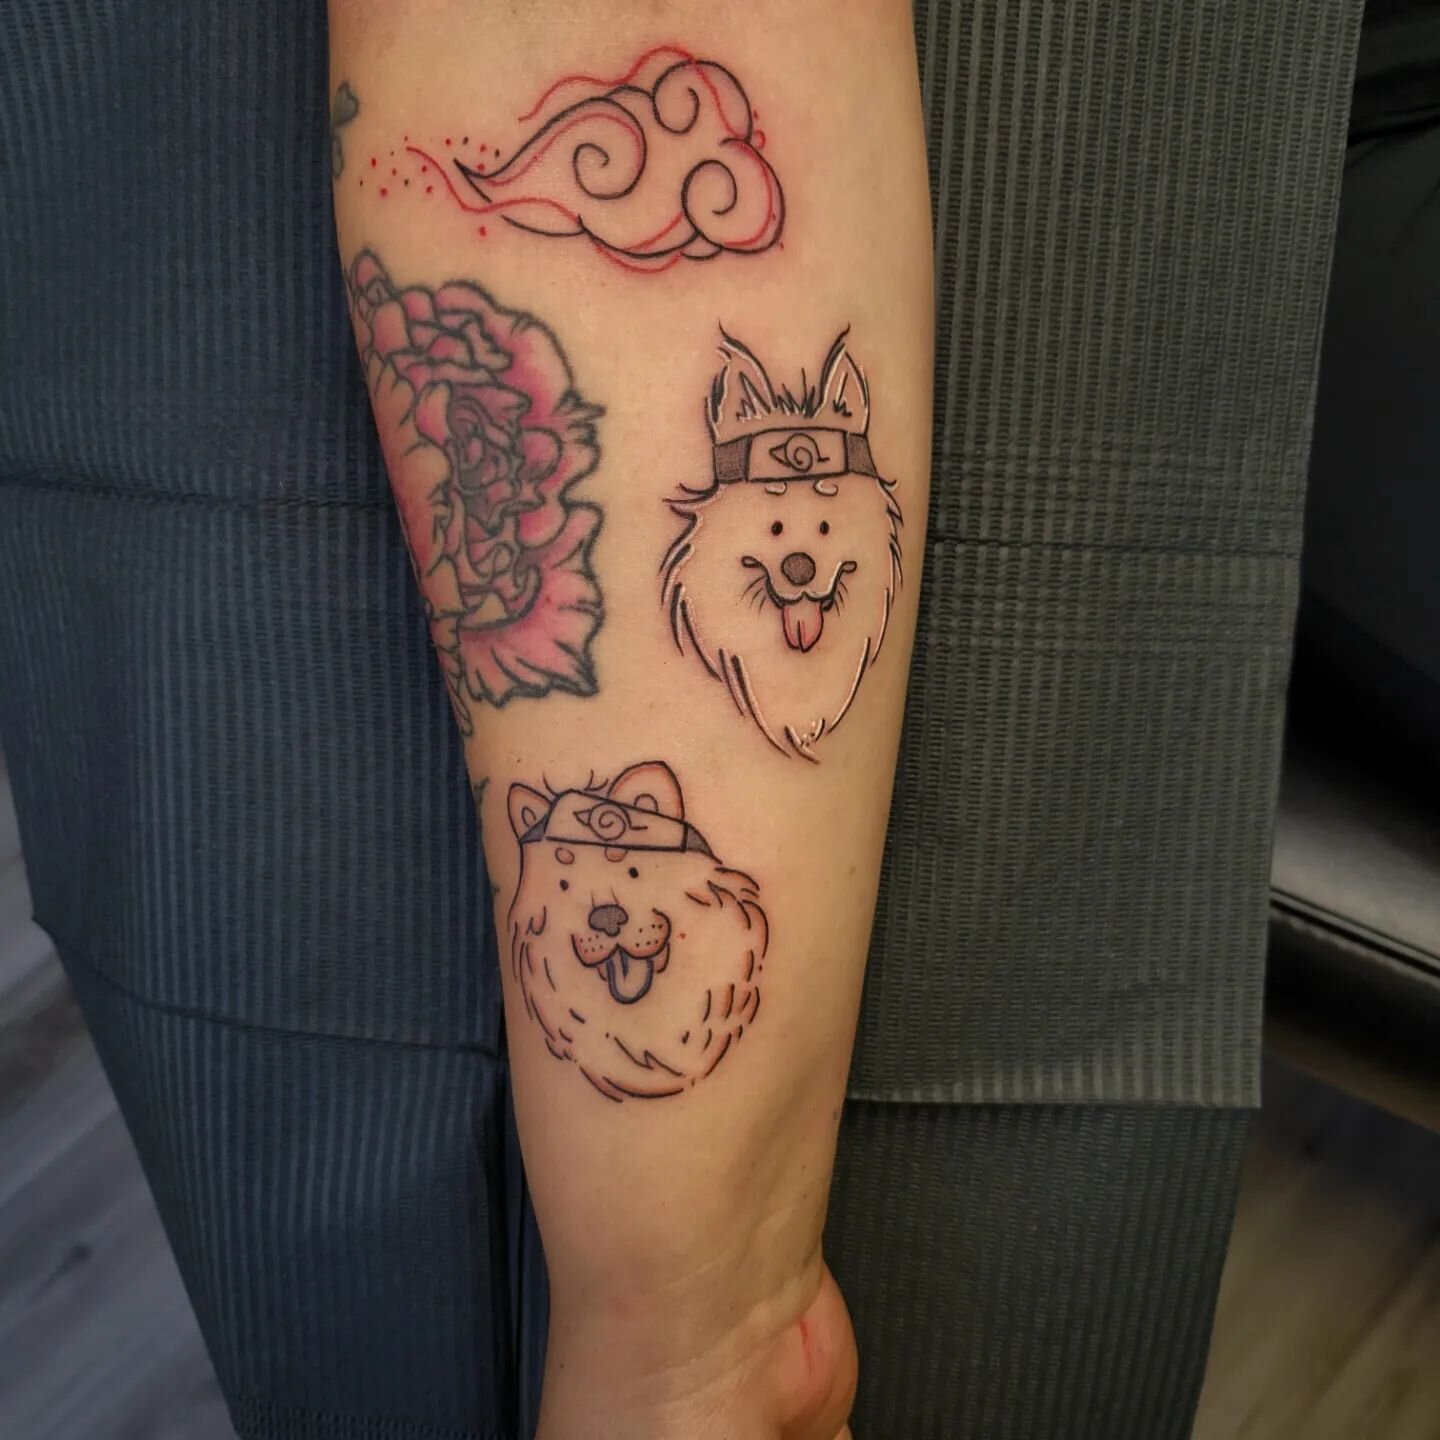 Shinobi &amp; Ninja 
Kawaii pup tattoos for Alice! Minimalist style. Thought it was a cute idea and would love to do more pets, in different styles ! 
.
.
.
.
.
#kawaii #doggo #doggotattoo #naruto #shinobi #ninja #pdxtattoo